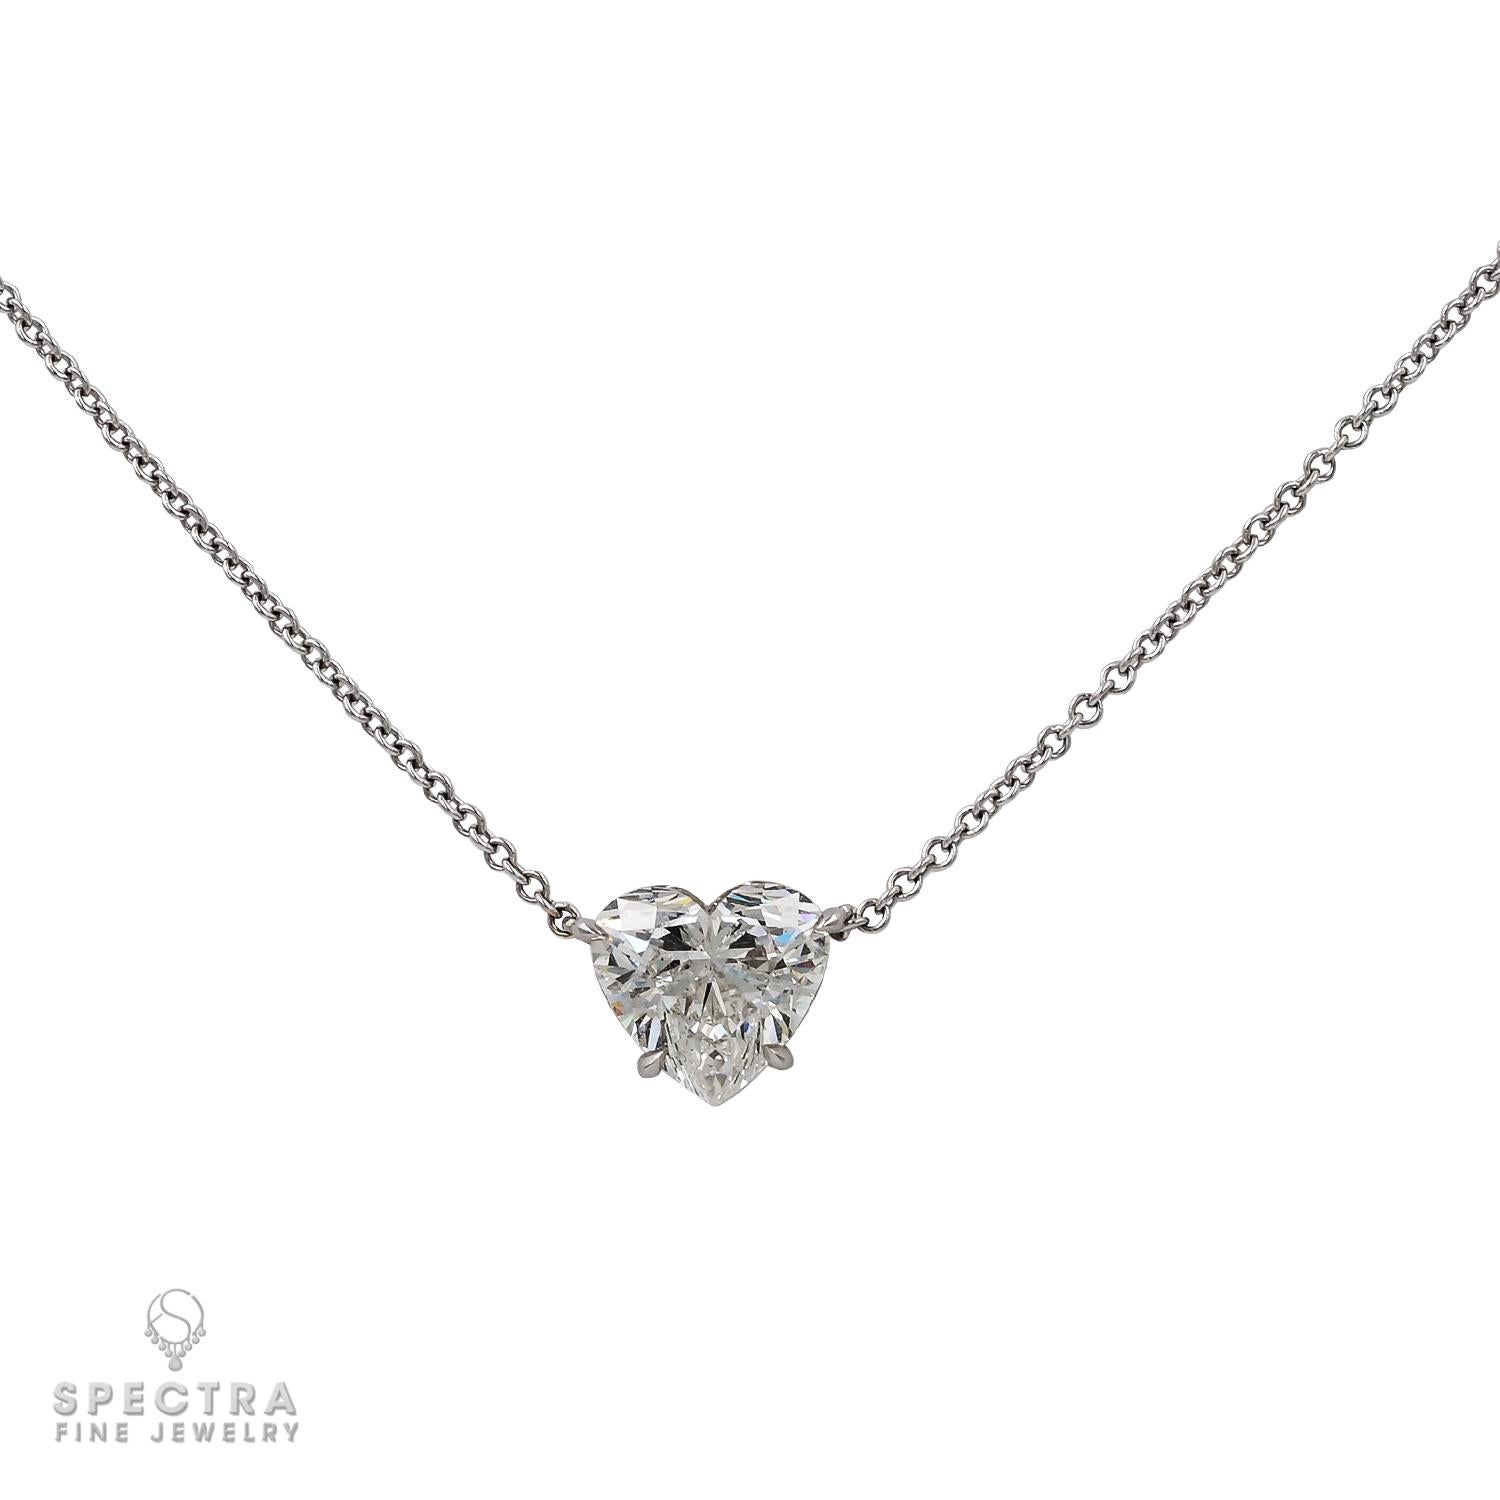 Introducing the Spectra Fine Jewelry 2.11ct HS I SI2 Diamond Necklace, a breathtaking masterpiece that embodies the epitome of luxury and beauty. This elegant necklace showcases a 2.11-carat heart-shape diamond, certified by the esteemed Gemological